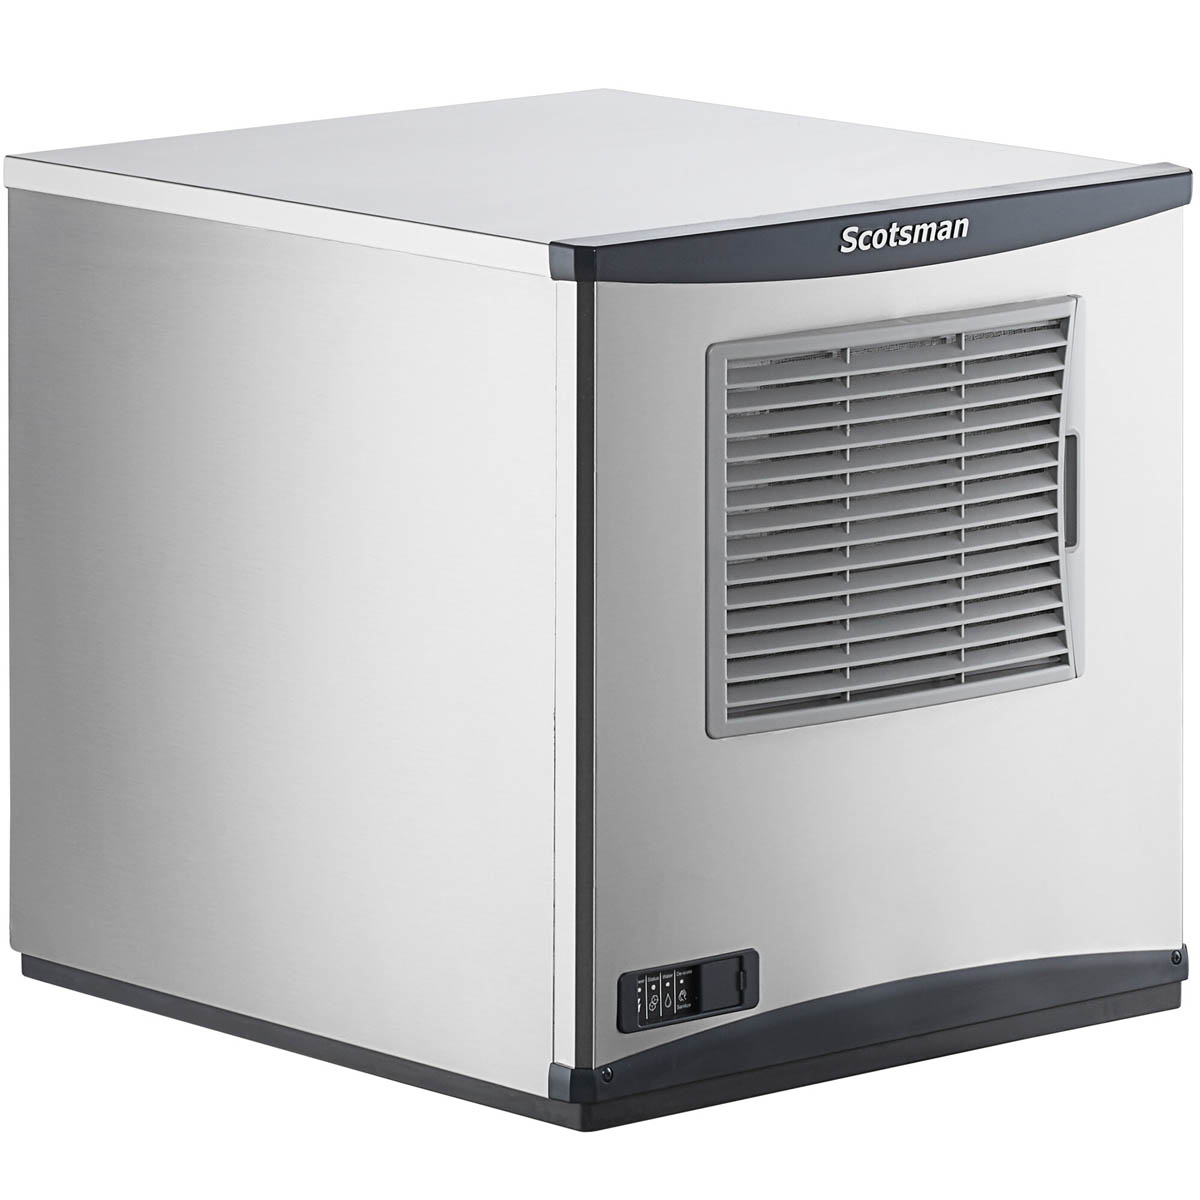 Scotsman NS0422W-1 22“ Water-Cooled Nugget-Style Ice Maker, 455 lbs/Day